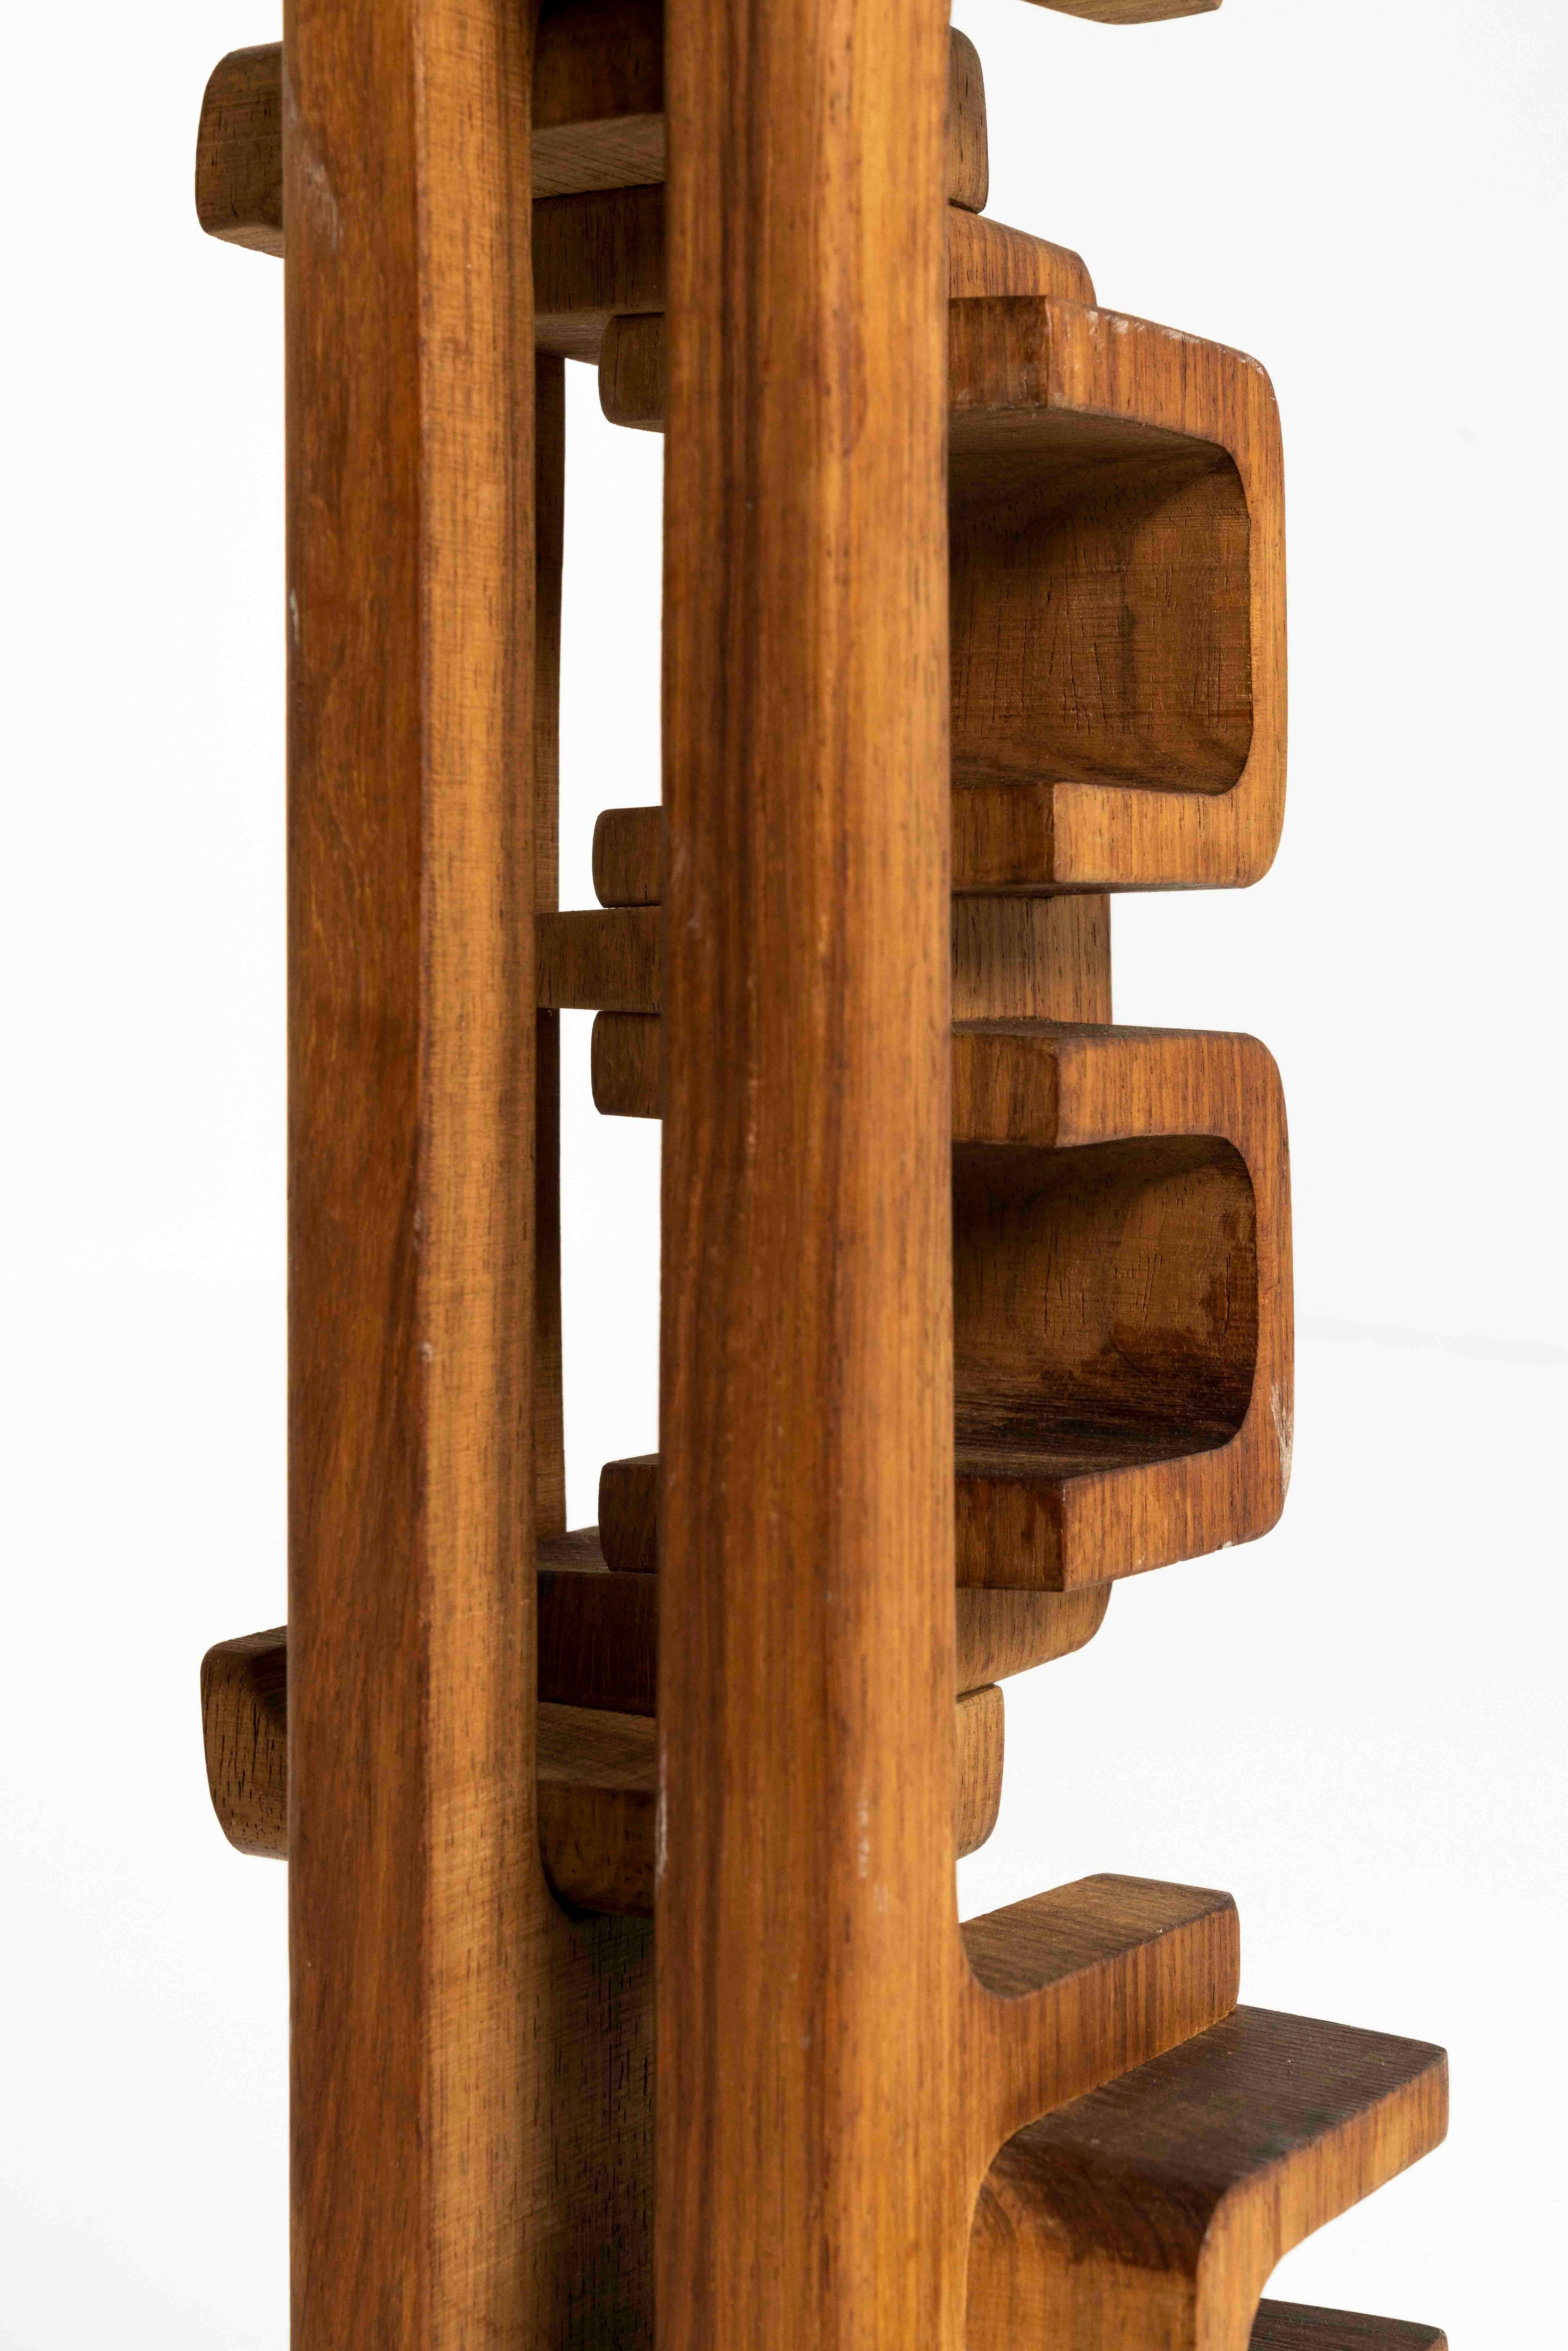 Late 20th Century Abstract Carved Wooden Sculpture by Brian Willsher, 1976 UK